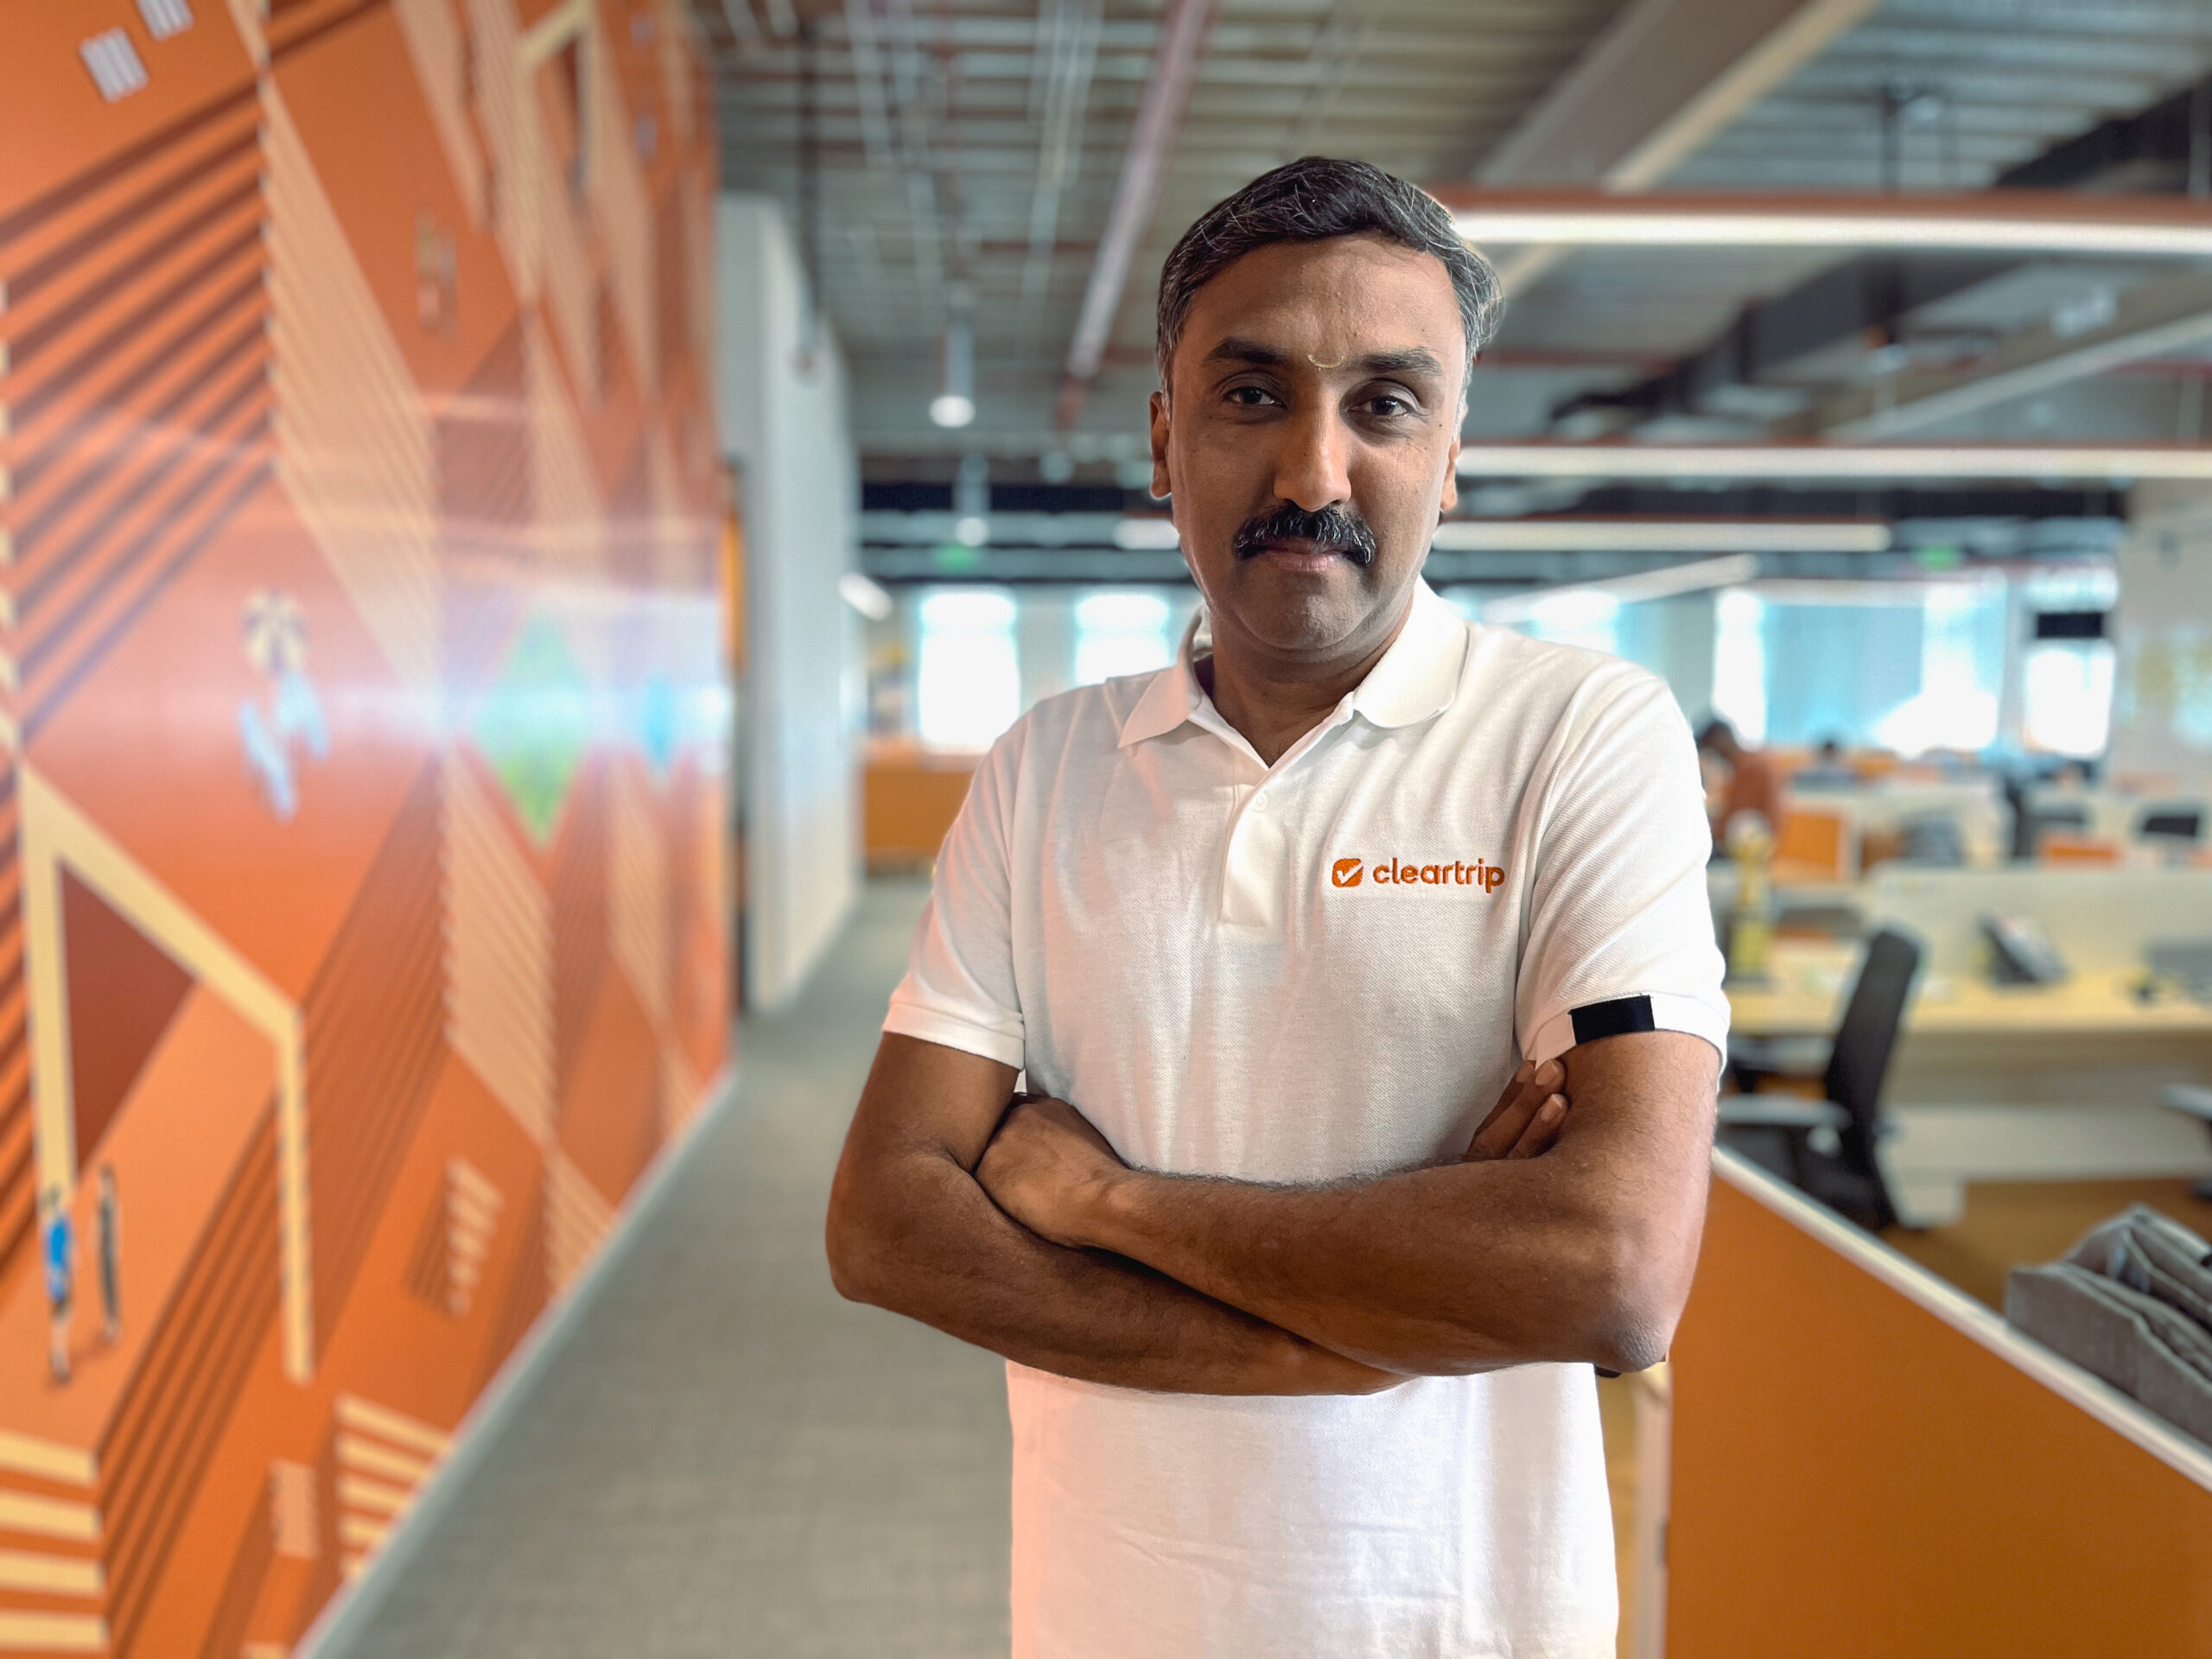 Cleartrip appoints Ganesh Ramaswamy as Chief Product and Technology Officer